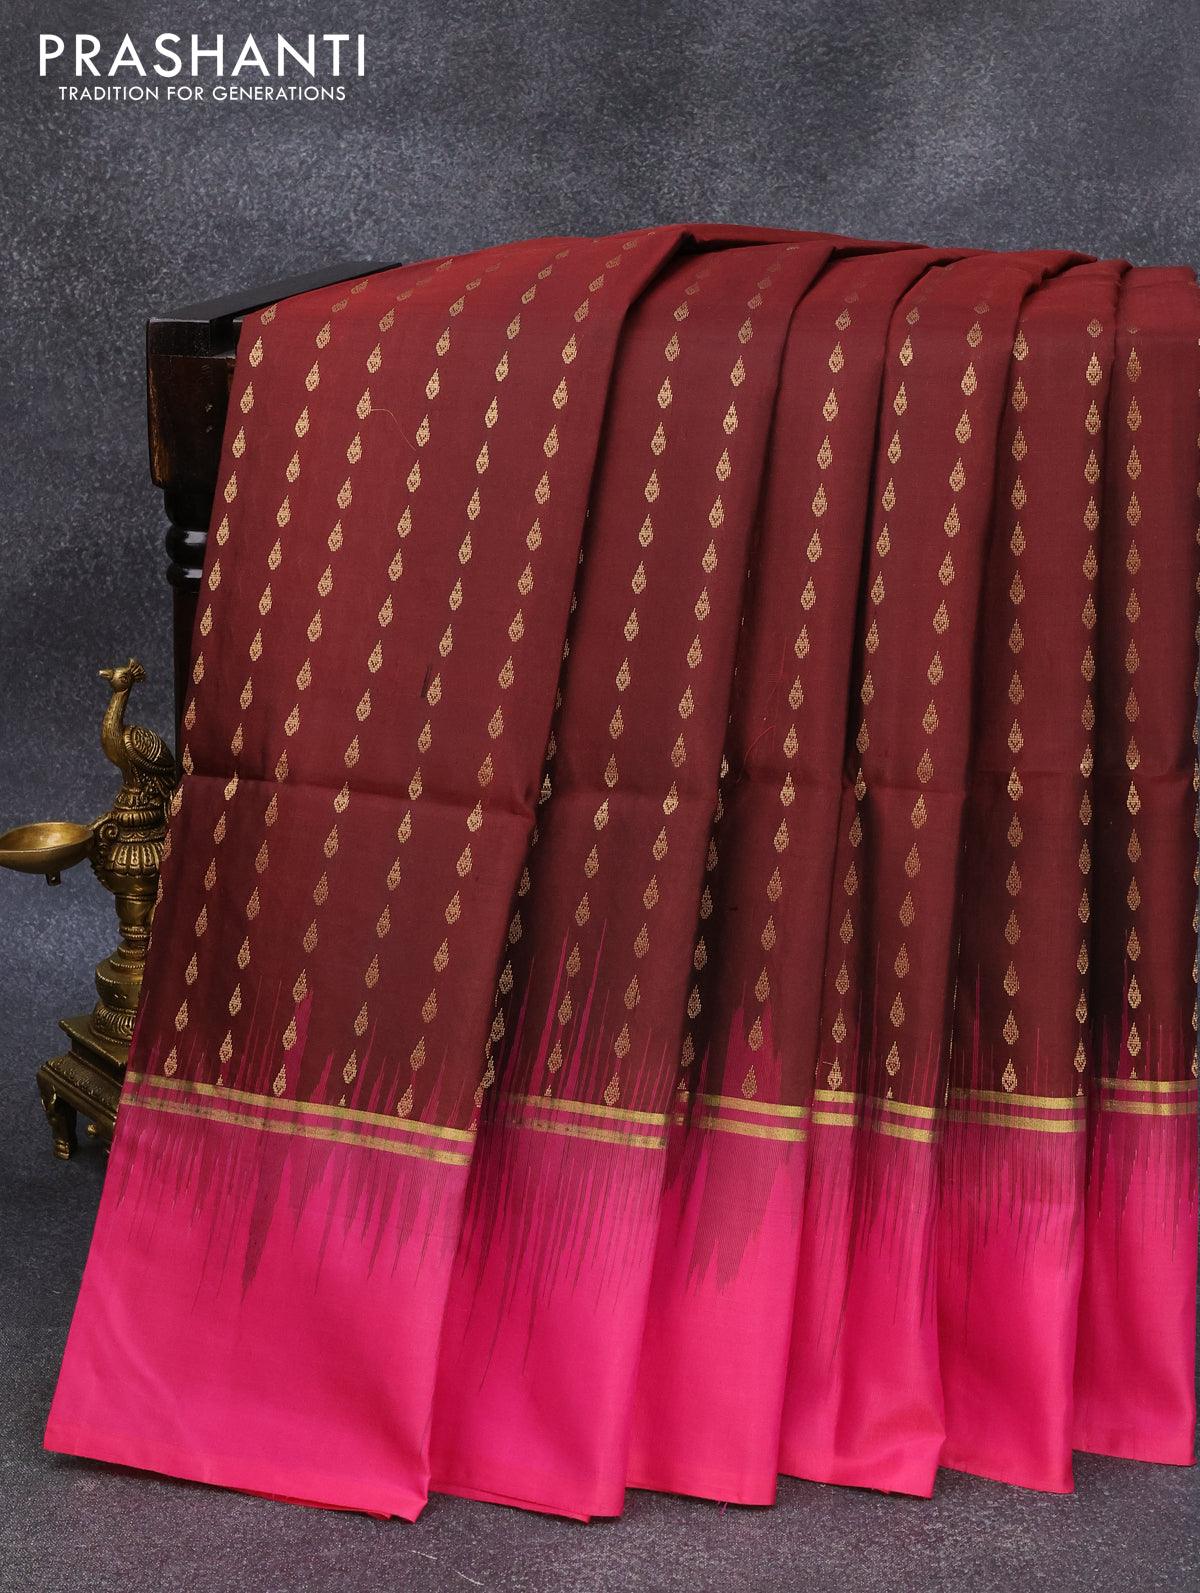 CODE WS885 : Dark maroon fancy dola silk saree (soft and silky)with  beautiful floral prints all over, gap borders, printed stripes as pallu,  plain running blouse with borders.